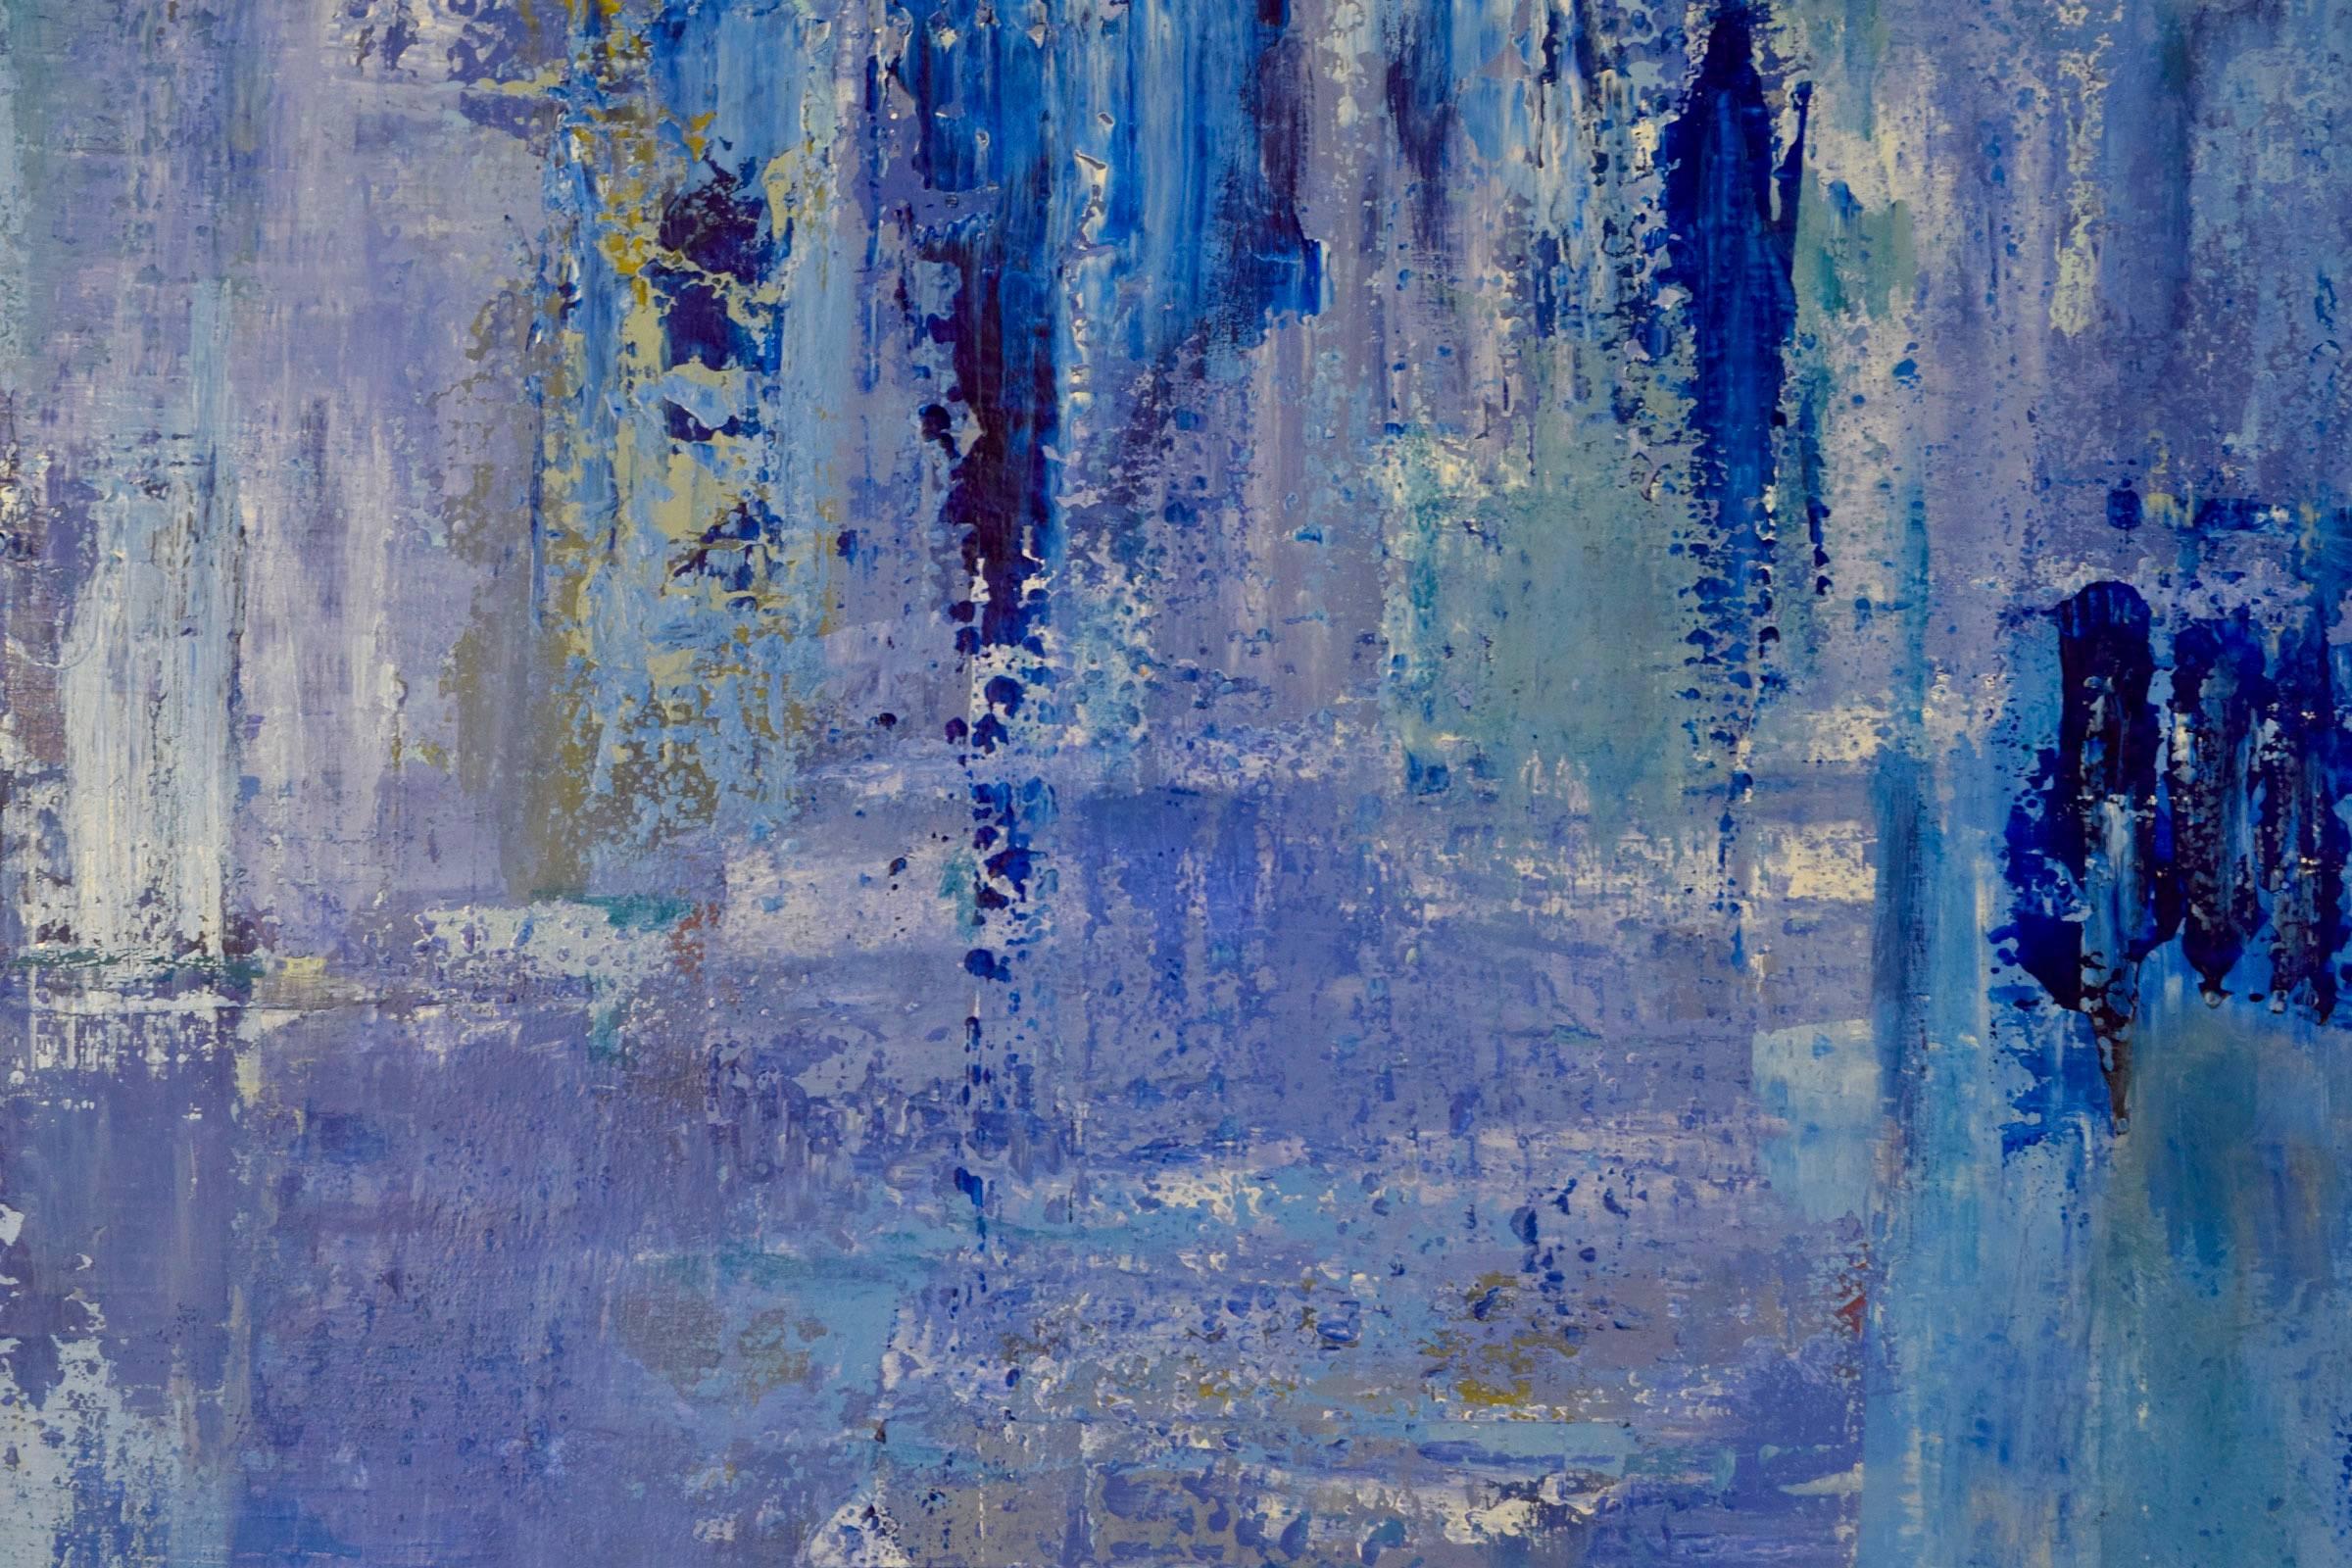 Beautiful abstract with lots of layers and texture. Angelina Kerene Conser.